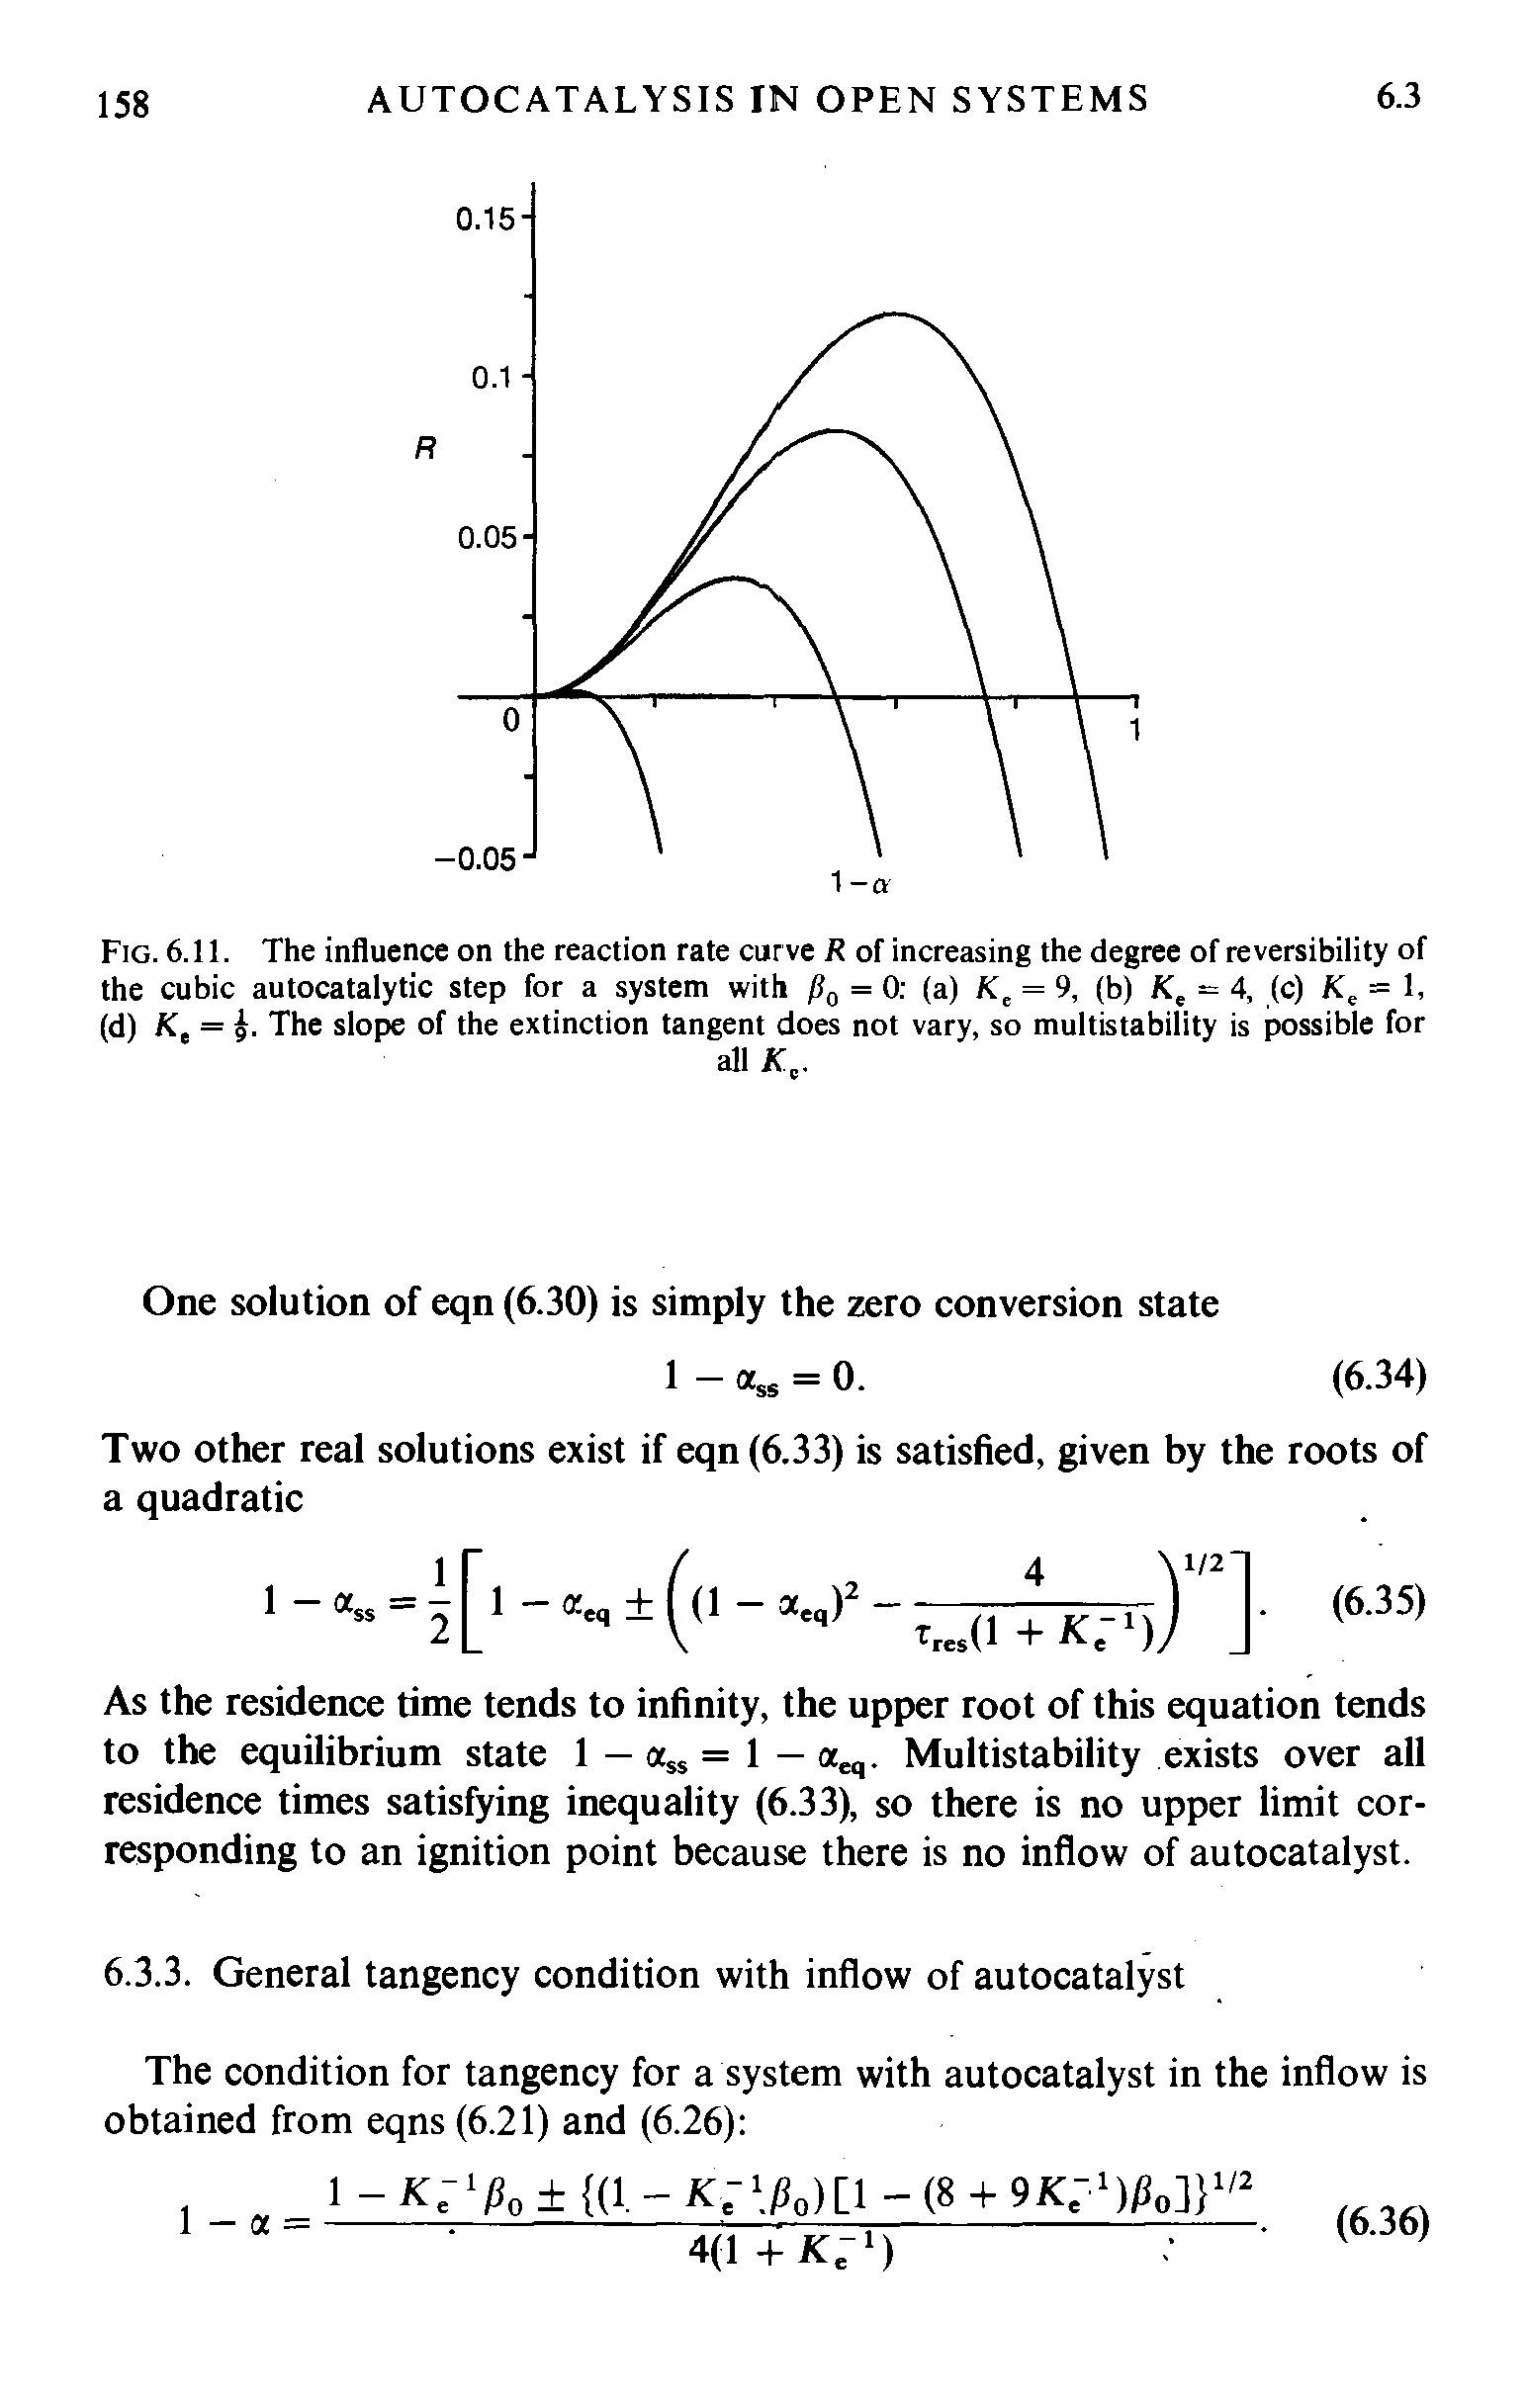 Fig. 6.11. The influence on the reaction rate curve R of increasing the degree of reversibility of the cubic autocatalytic step for a system with /i0 = 0 (a) Kc = 9, (b) Ke - 4, (c) = 1,...